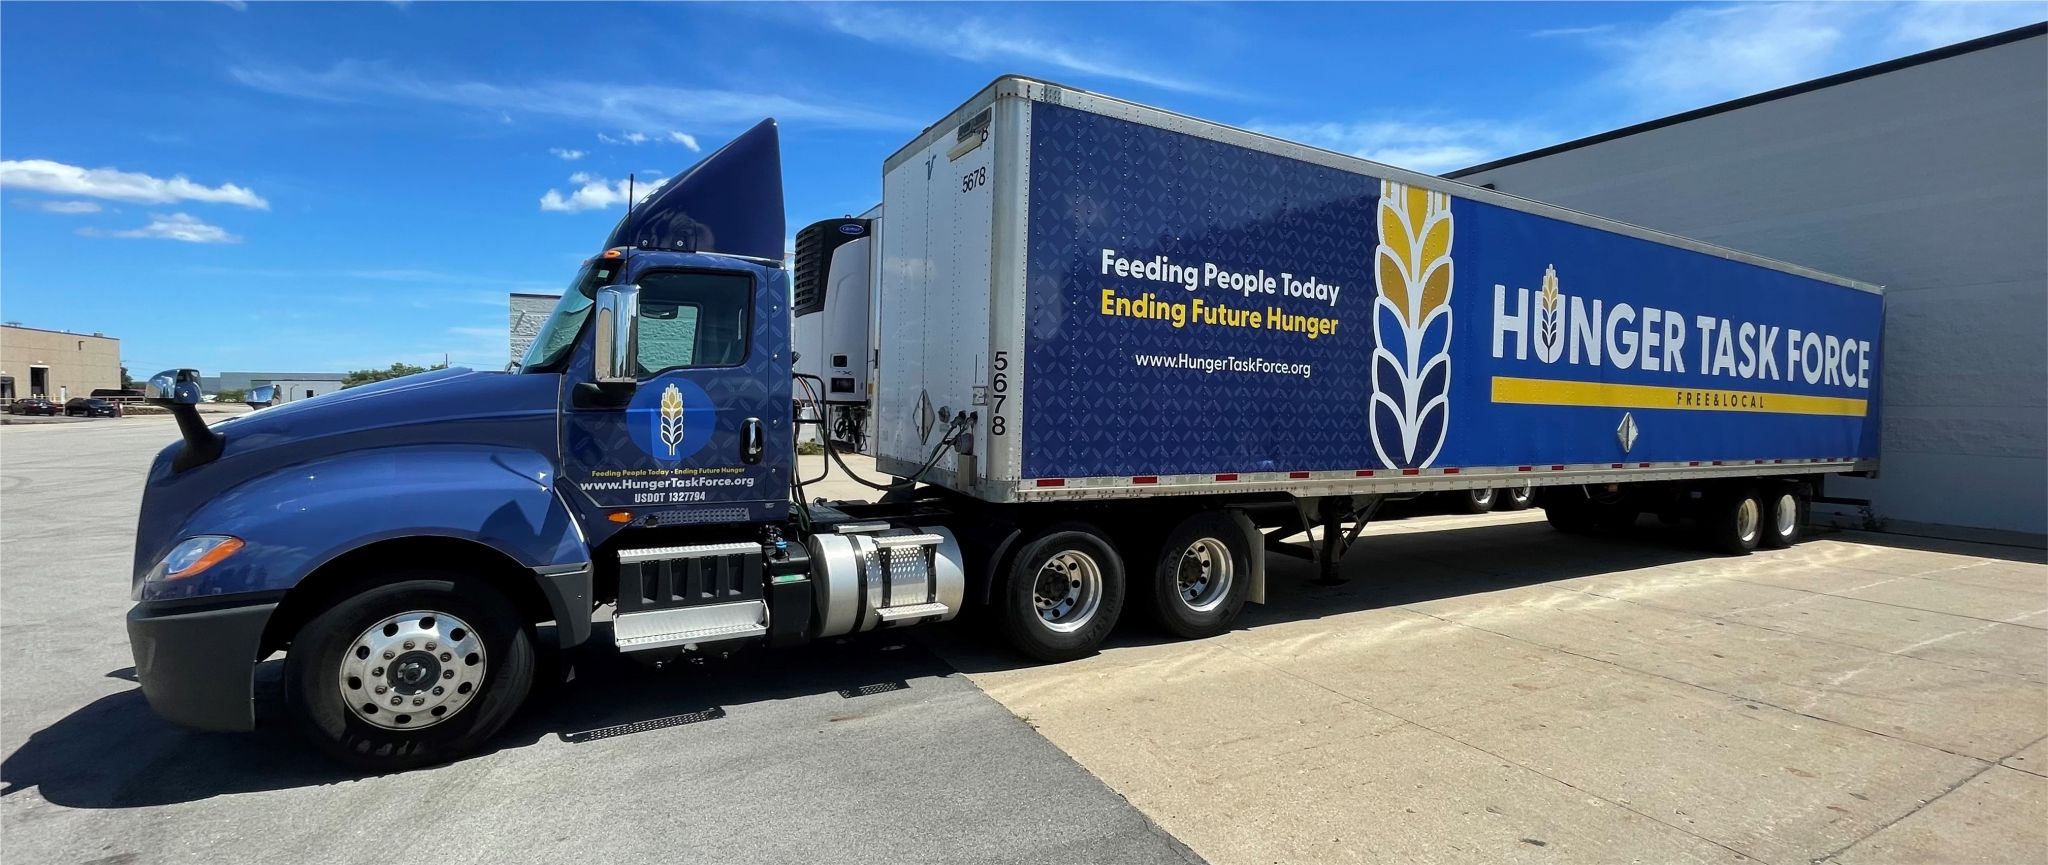 Semi truck with Hunger Task Force's logo on the side.